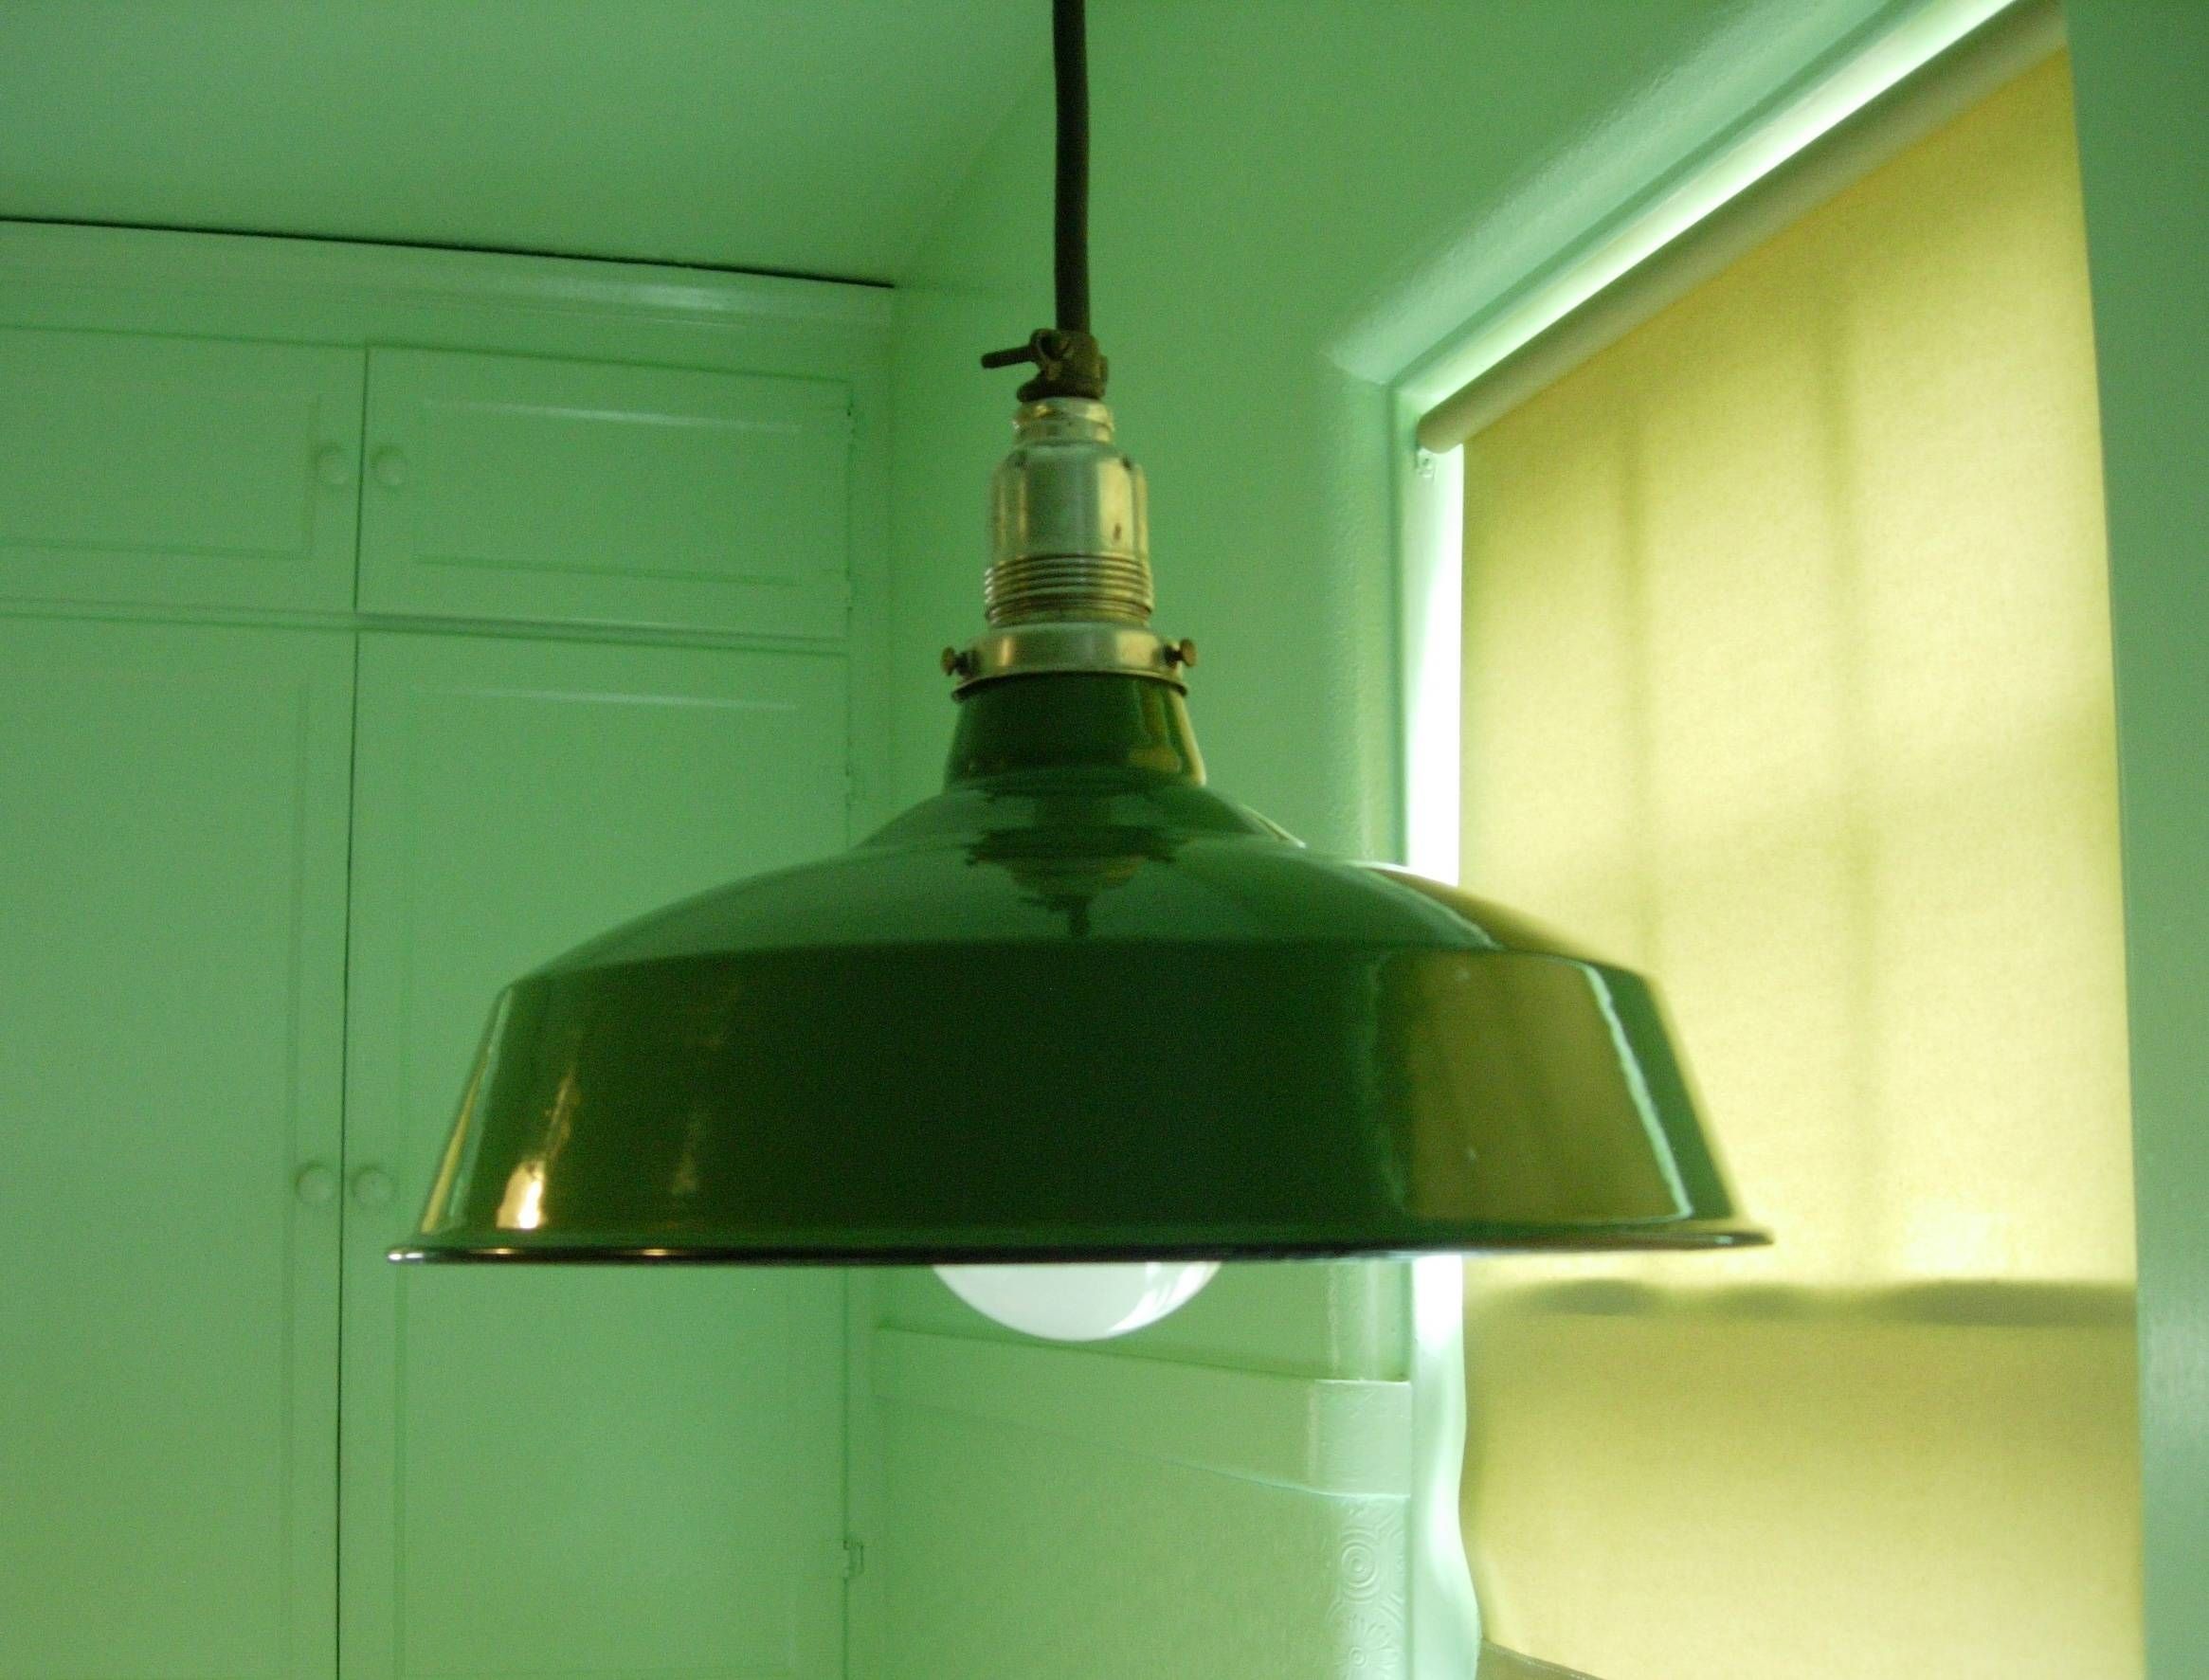 Vintage Barn Lights | Original Vintage Reclaimed And Upcycled Throughout Barn Pendant Lights Fixtures (View 9 of 15)